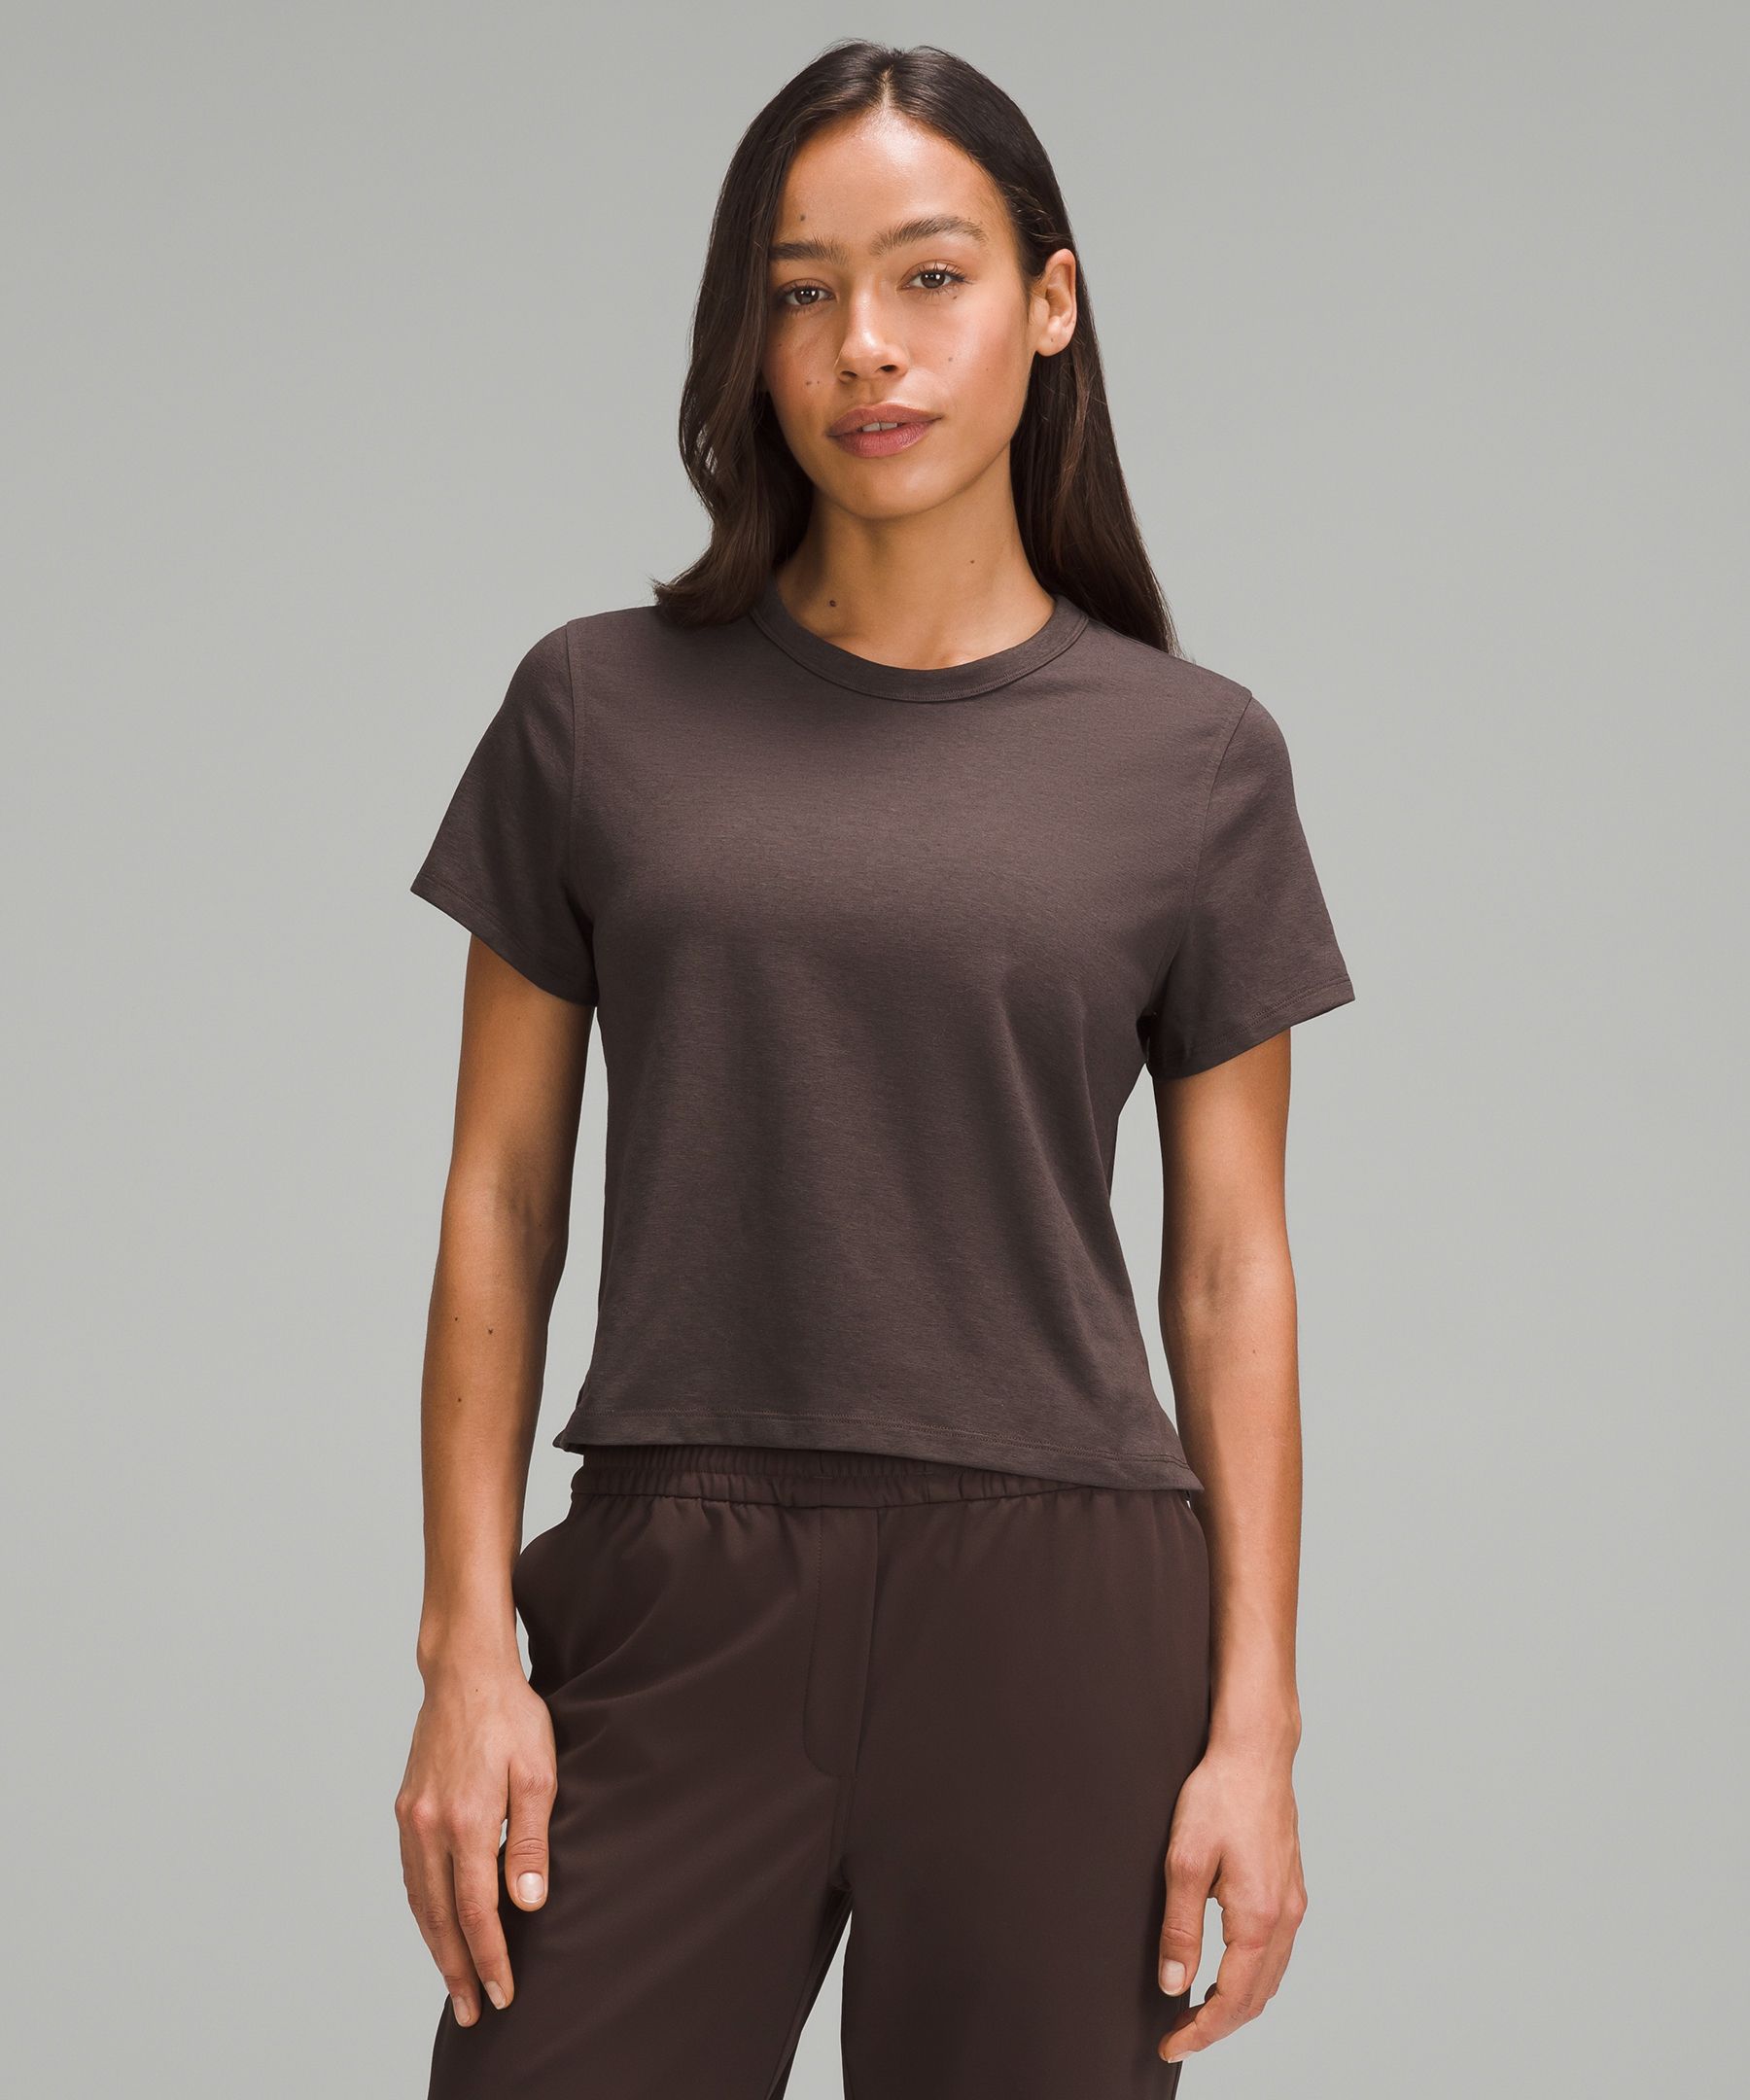 First purchase in 6 months!! LA Gathered Back T-shirt (10) in green fern,  paired w/ Align 8” HR short in graphite grey : r/lululemon